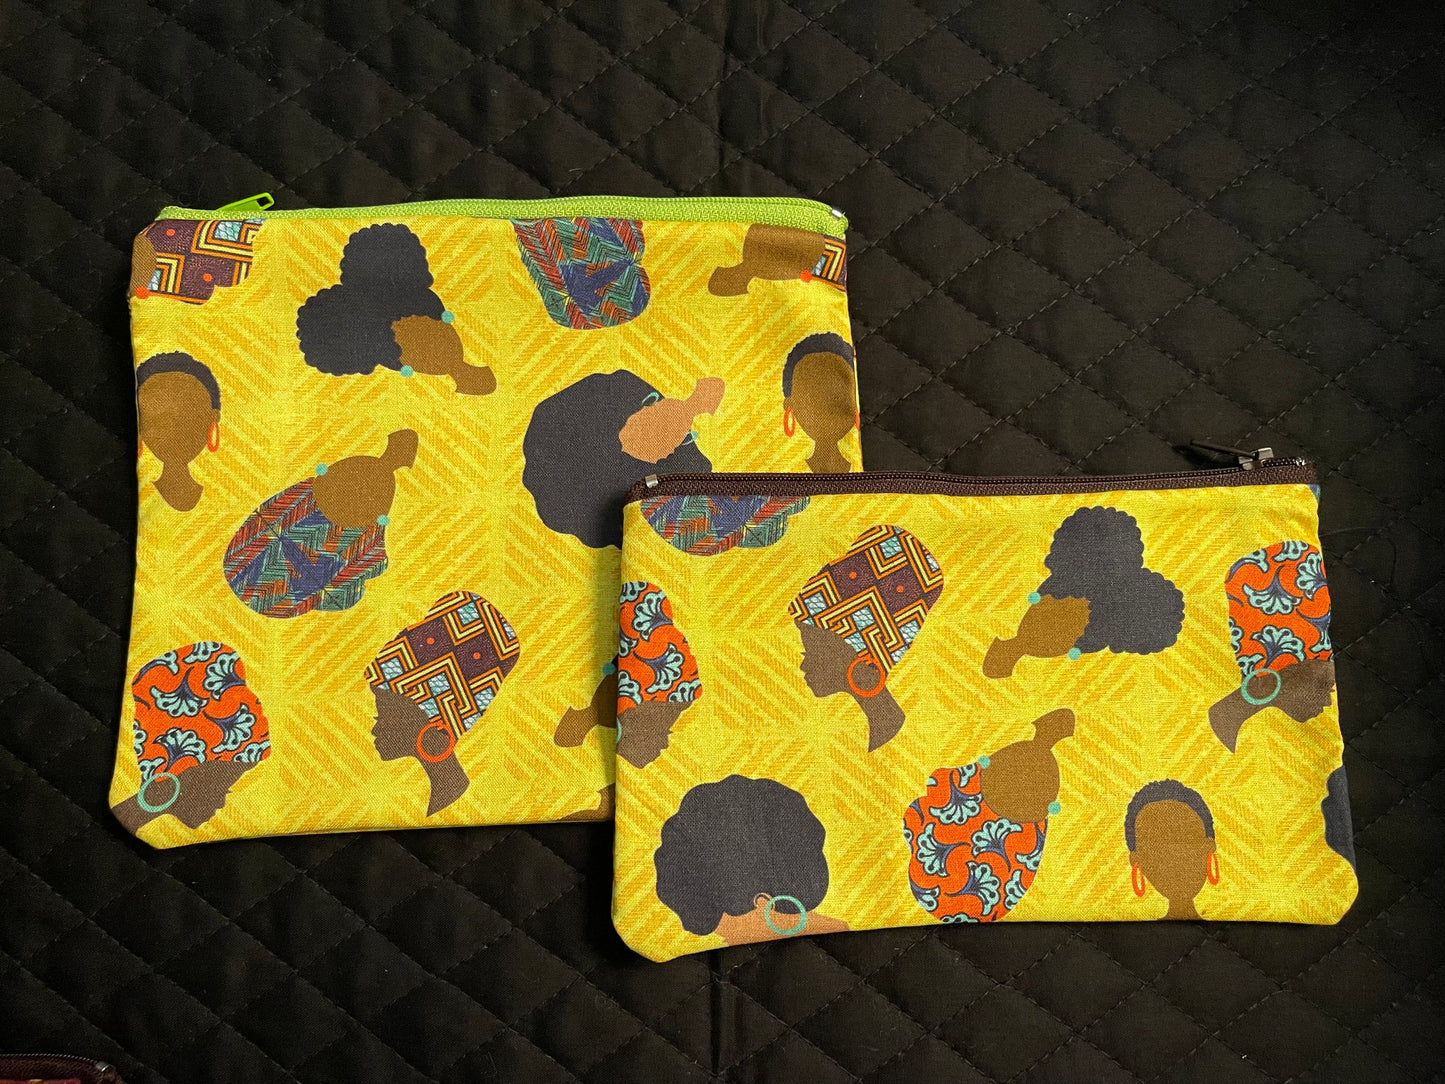 2-piece "Sistas" medium and large make-up pouch